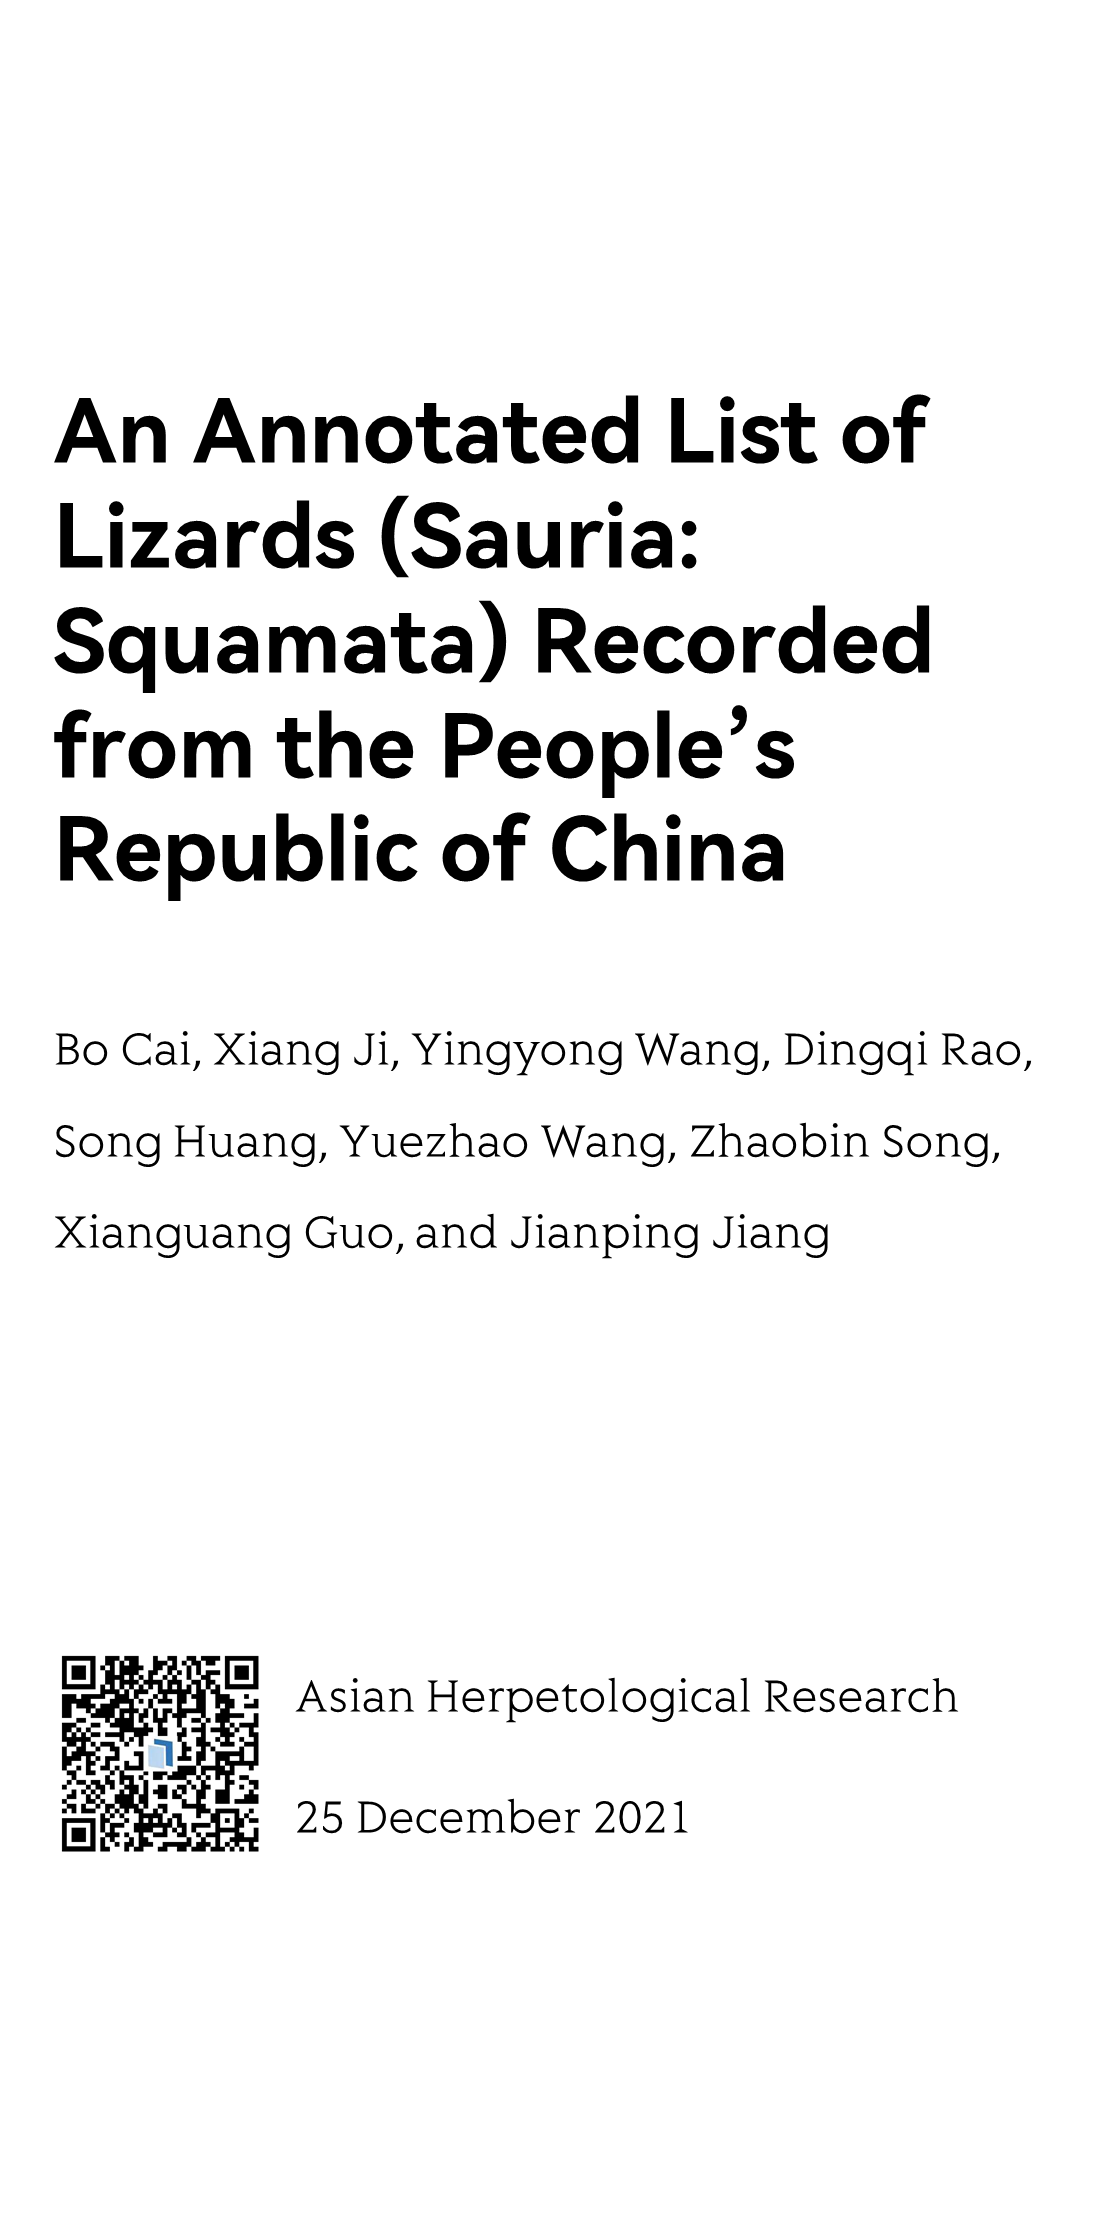 An Annotated List of Lizards (Sauria: Squamata) Recorded from the People’s Republic of China_1